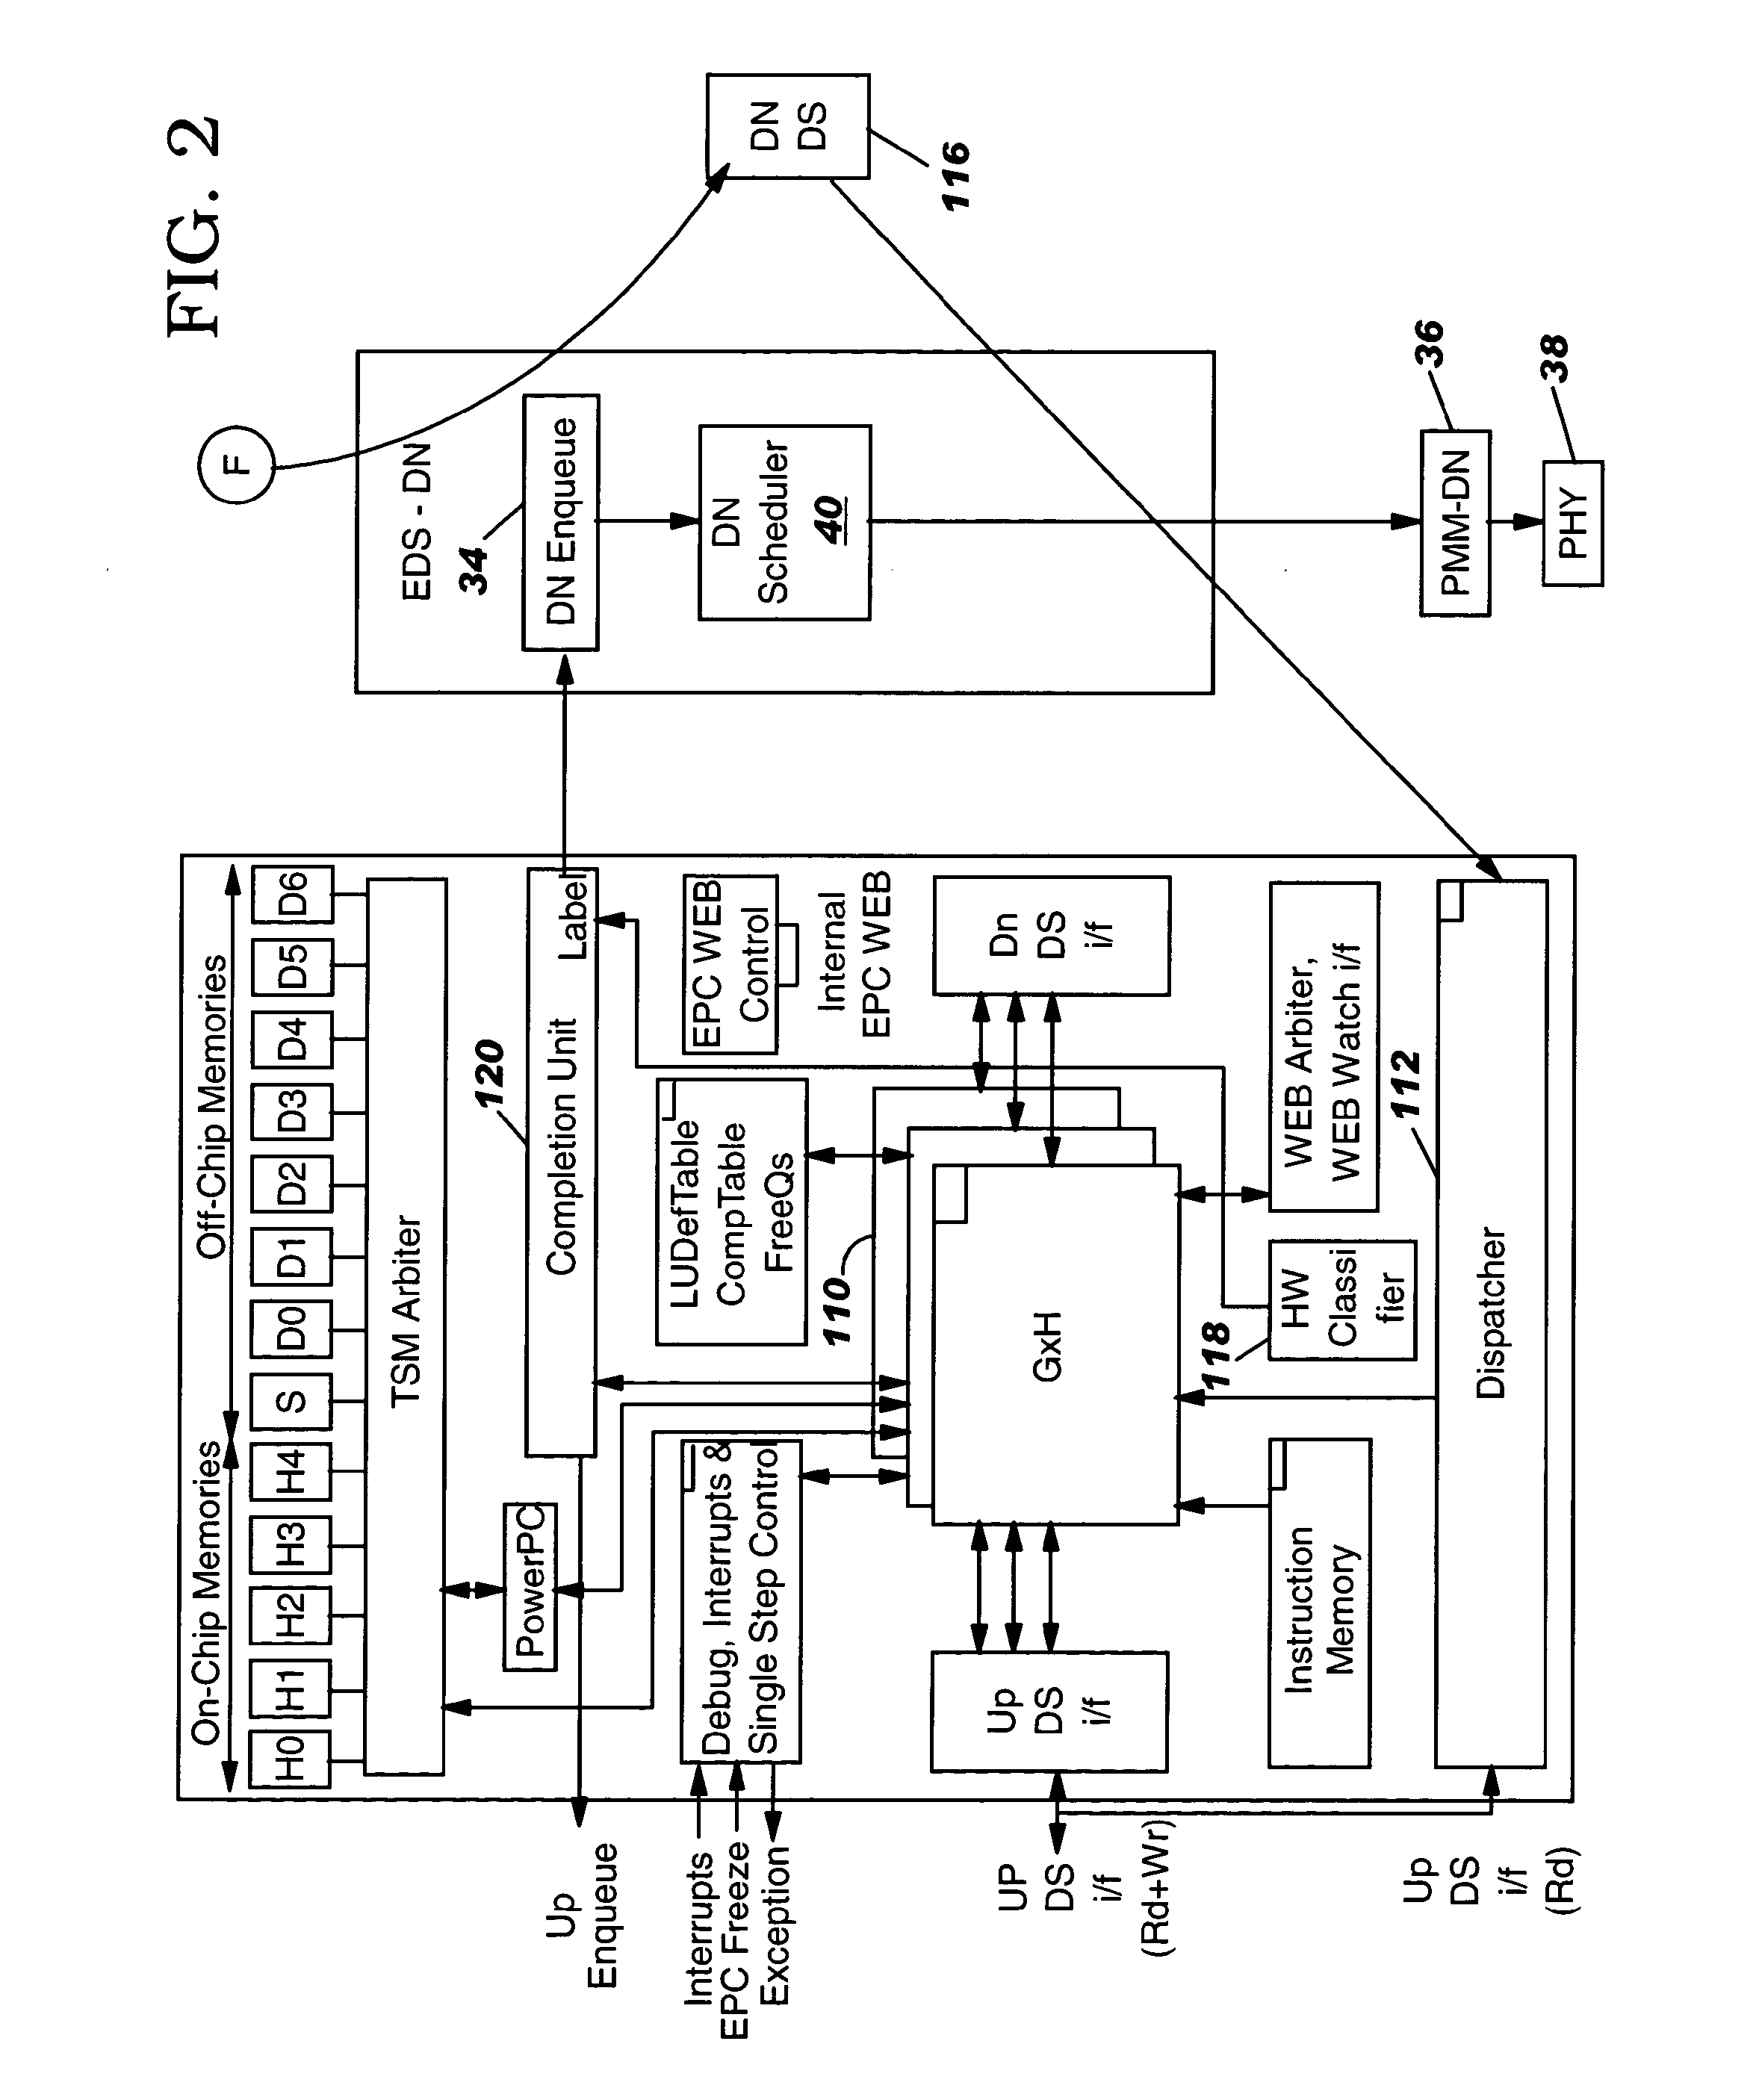 Apparatus and method to coordinate calendar searches in a network scheduler given limited resources